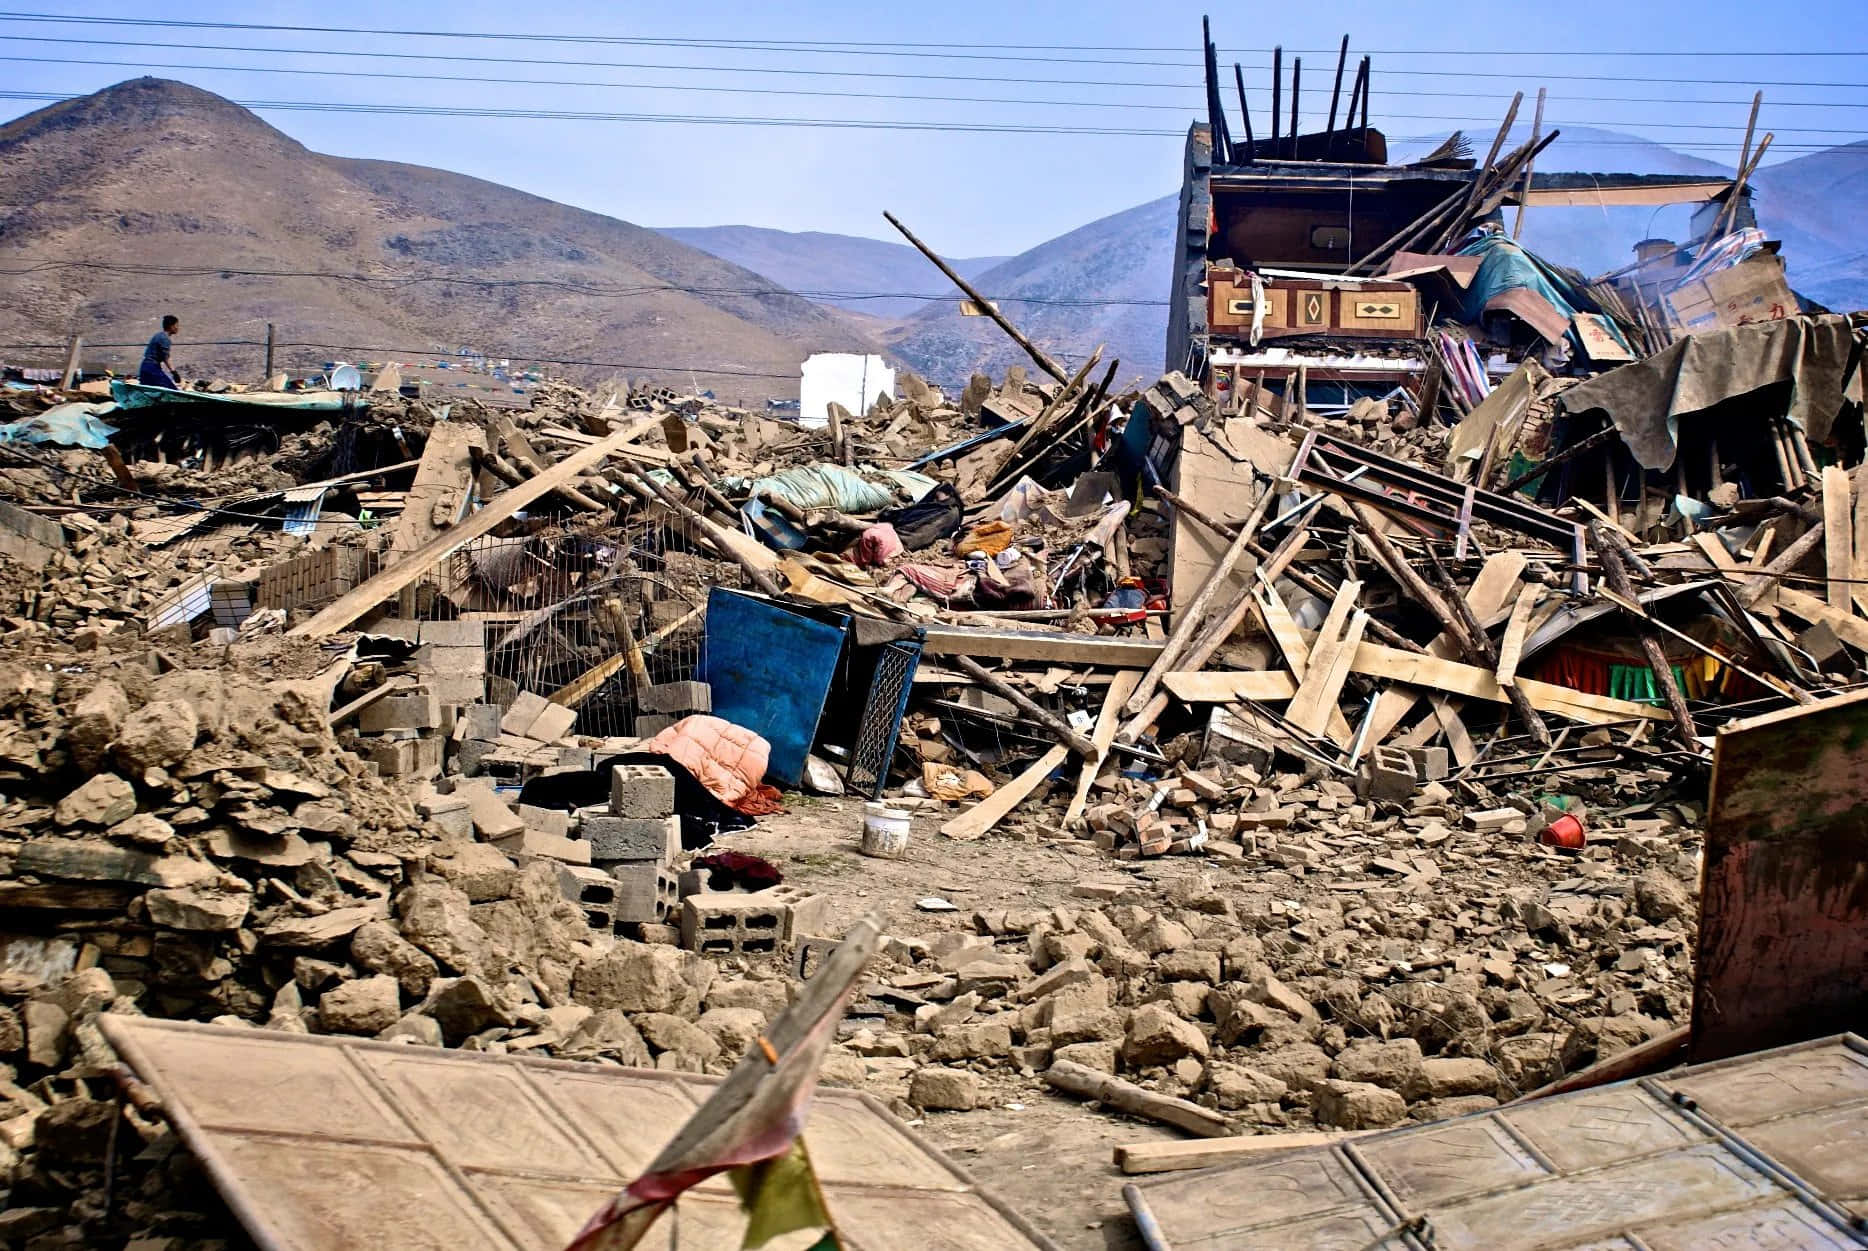 A Village With Debris And A Mountain In The Background